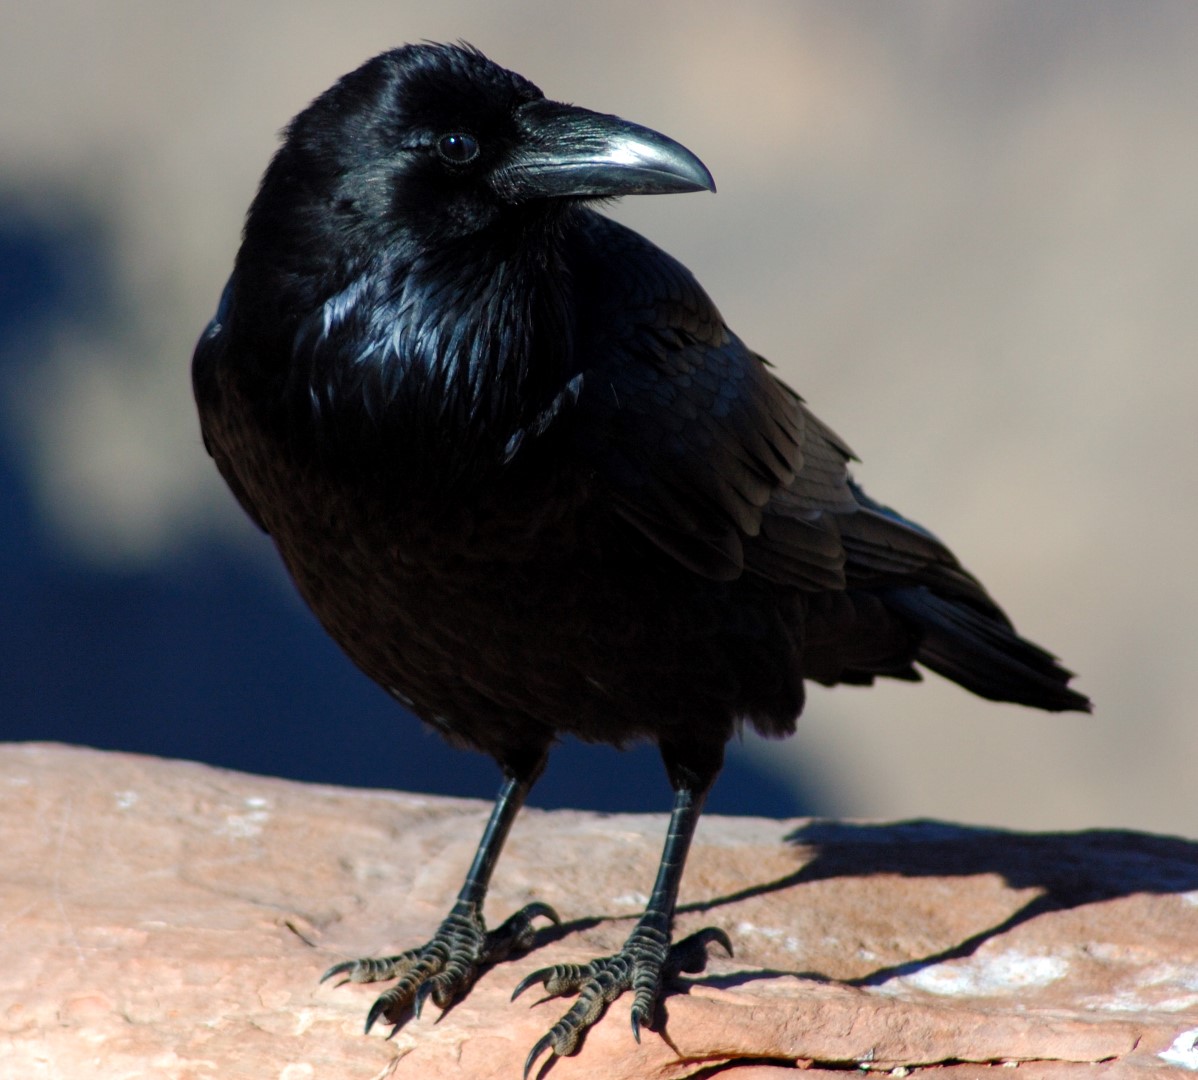 If you sit for a while, you might get a visit from a large raven like this one. These highly intelligent birds are almost always seen in pairs. They love to hover and dance in the updrafts created by the canyon walls. Photo by Crista Worthy.